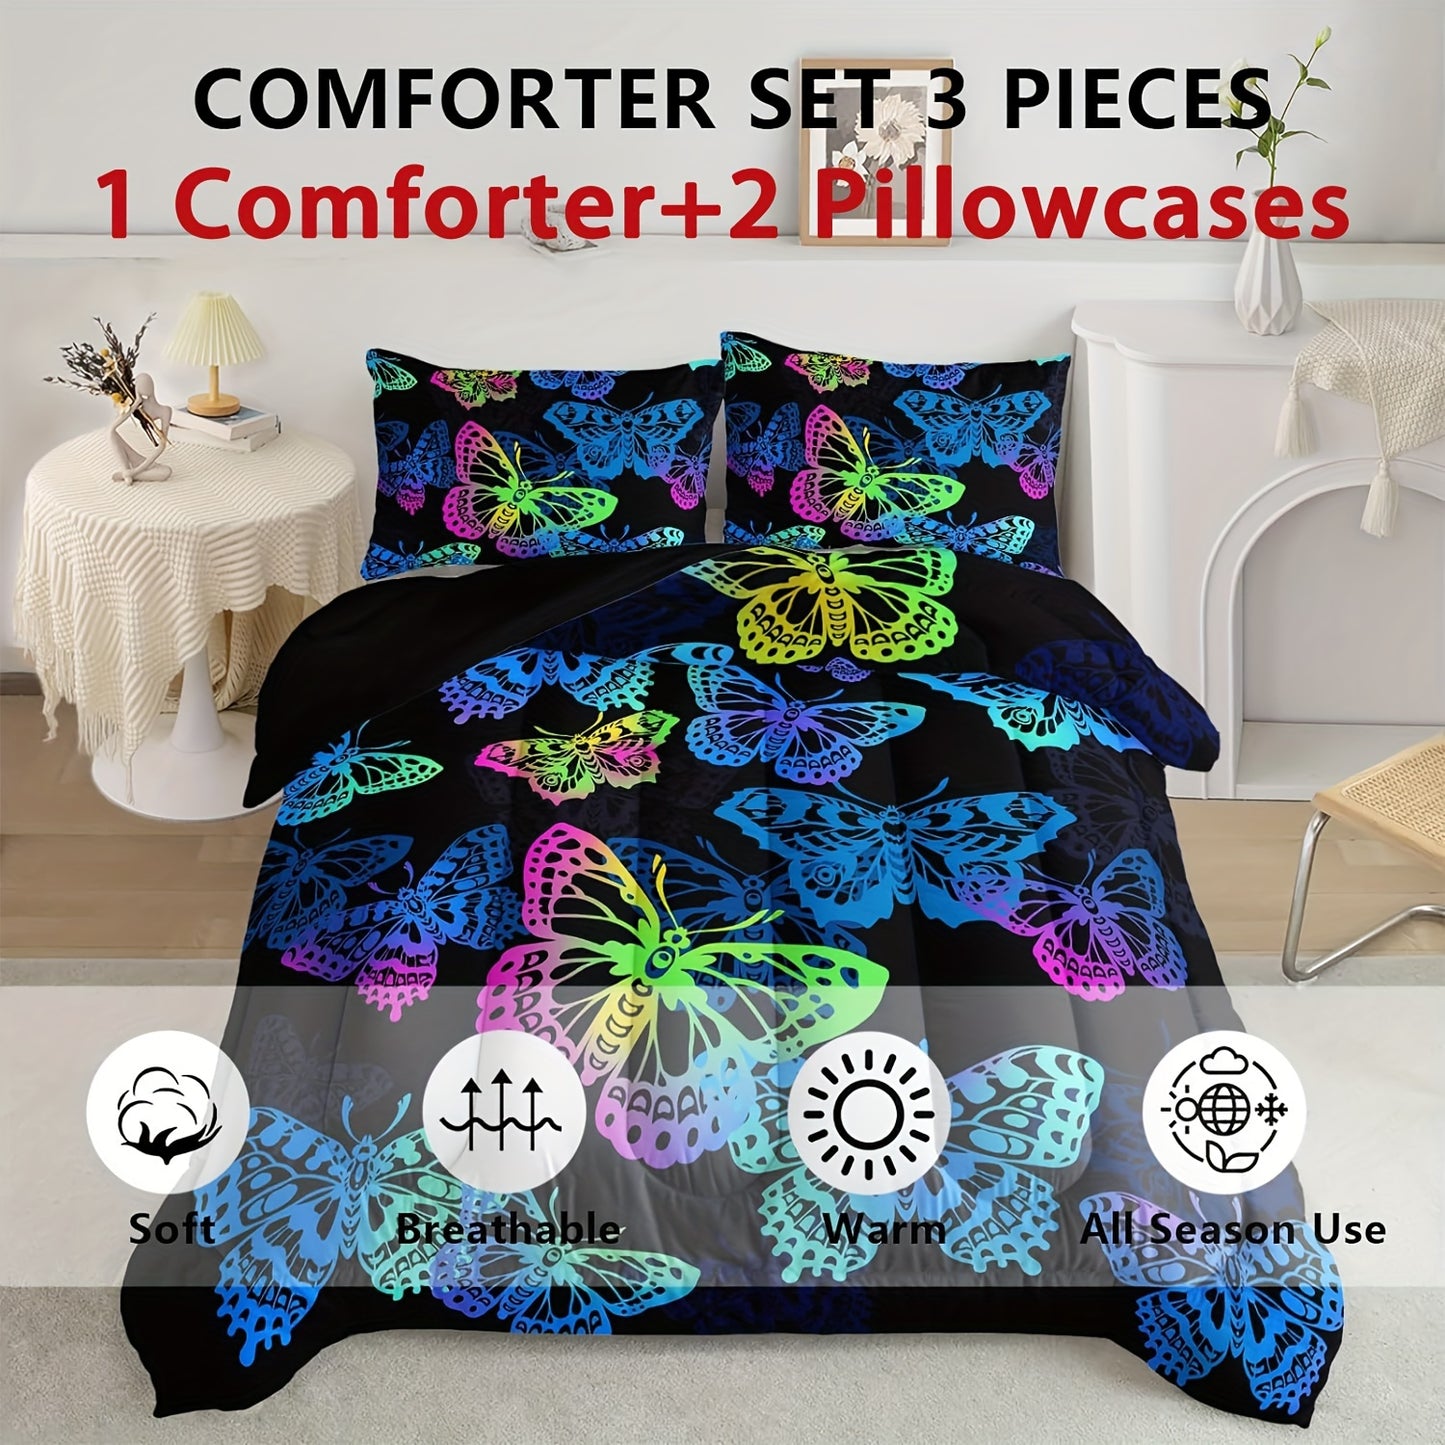 3pcs Colorful Butterflies Print Comforter Set For Girls Teens Boys, Soft Comfortable Comfortable Bedding Set, For Bedroom Guest Room Dorm (1*Comforter + 2*Pillowcase, Without Core)